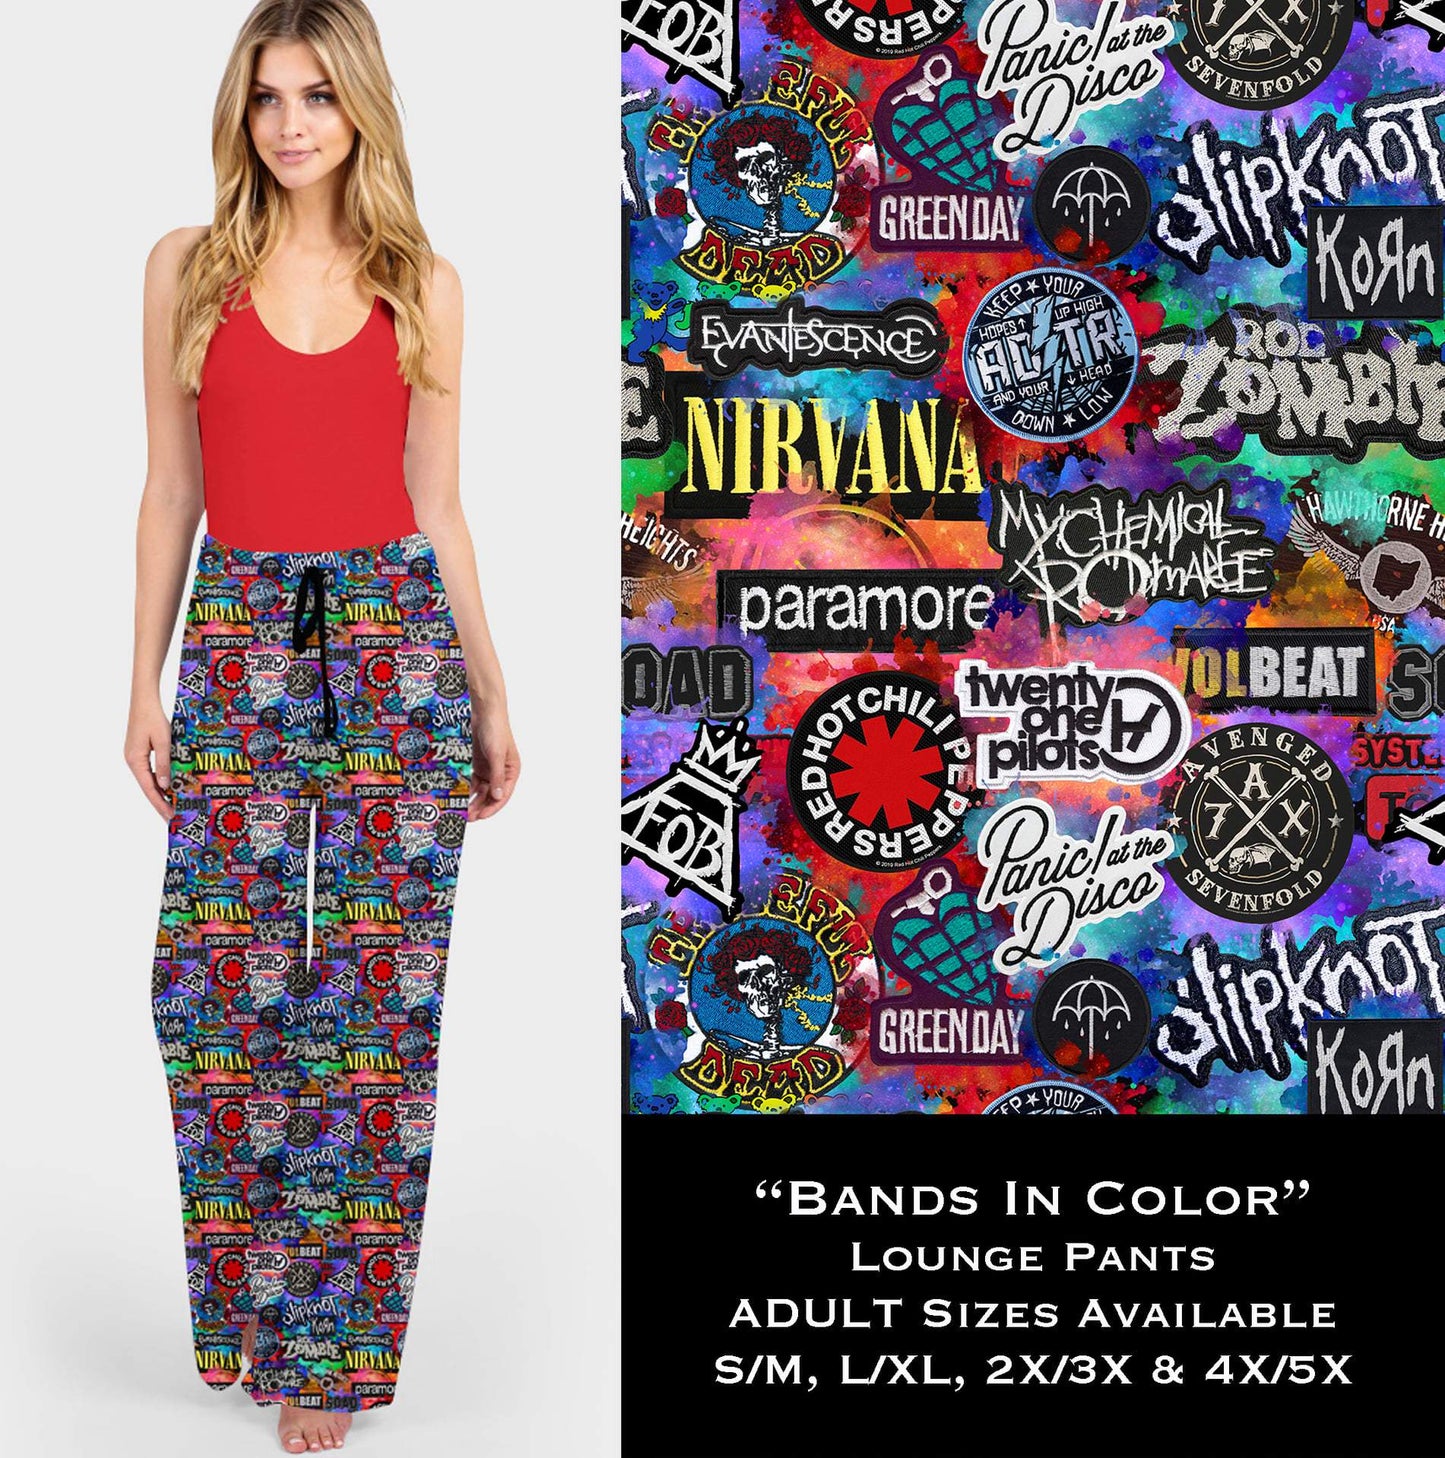 Bands in Color - Lounge Pants